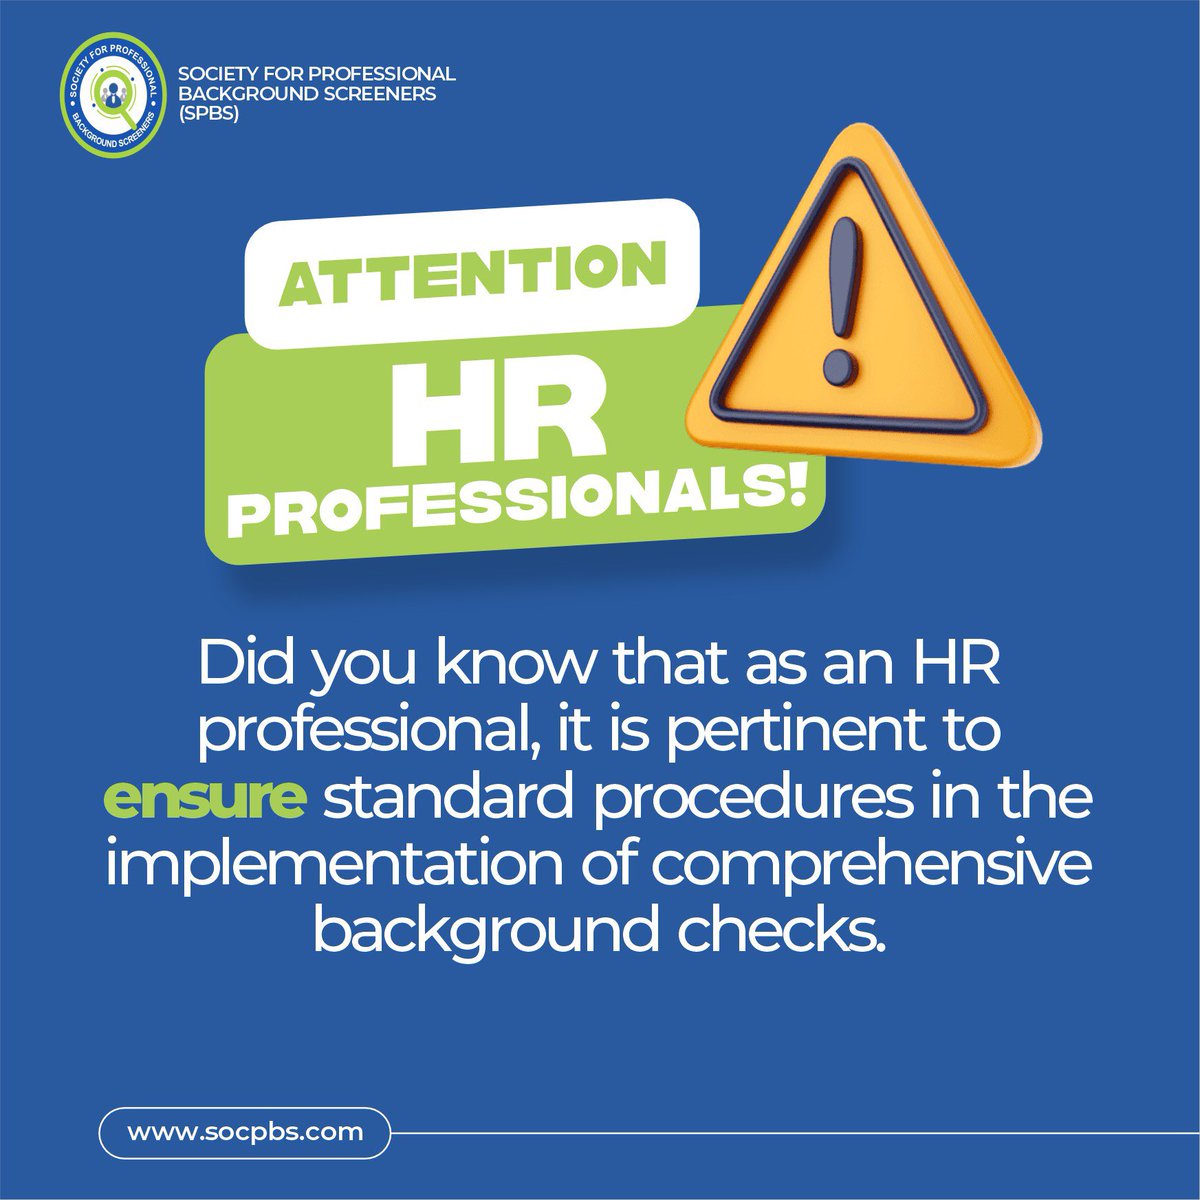 As an HR professional, elevate your hiring process by mastering background screening standards with our expert training.

Visit socpbs.com or DM us for more information. Join us today!

#hr #hrtraining #hrnigeria #hrtransformation #hrmanagement #workculture #job